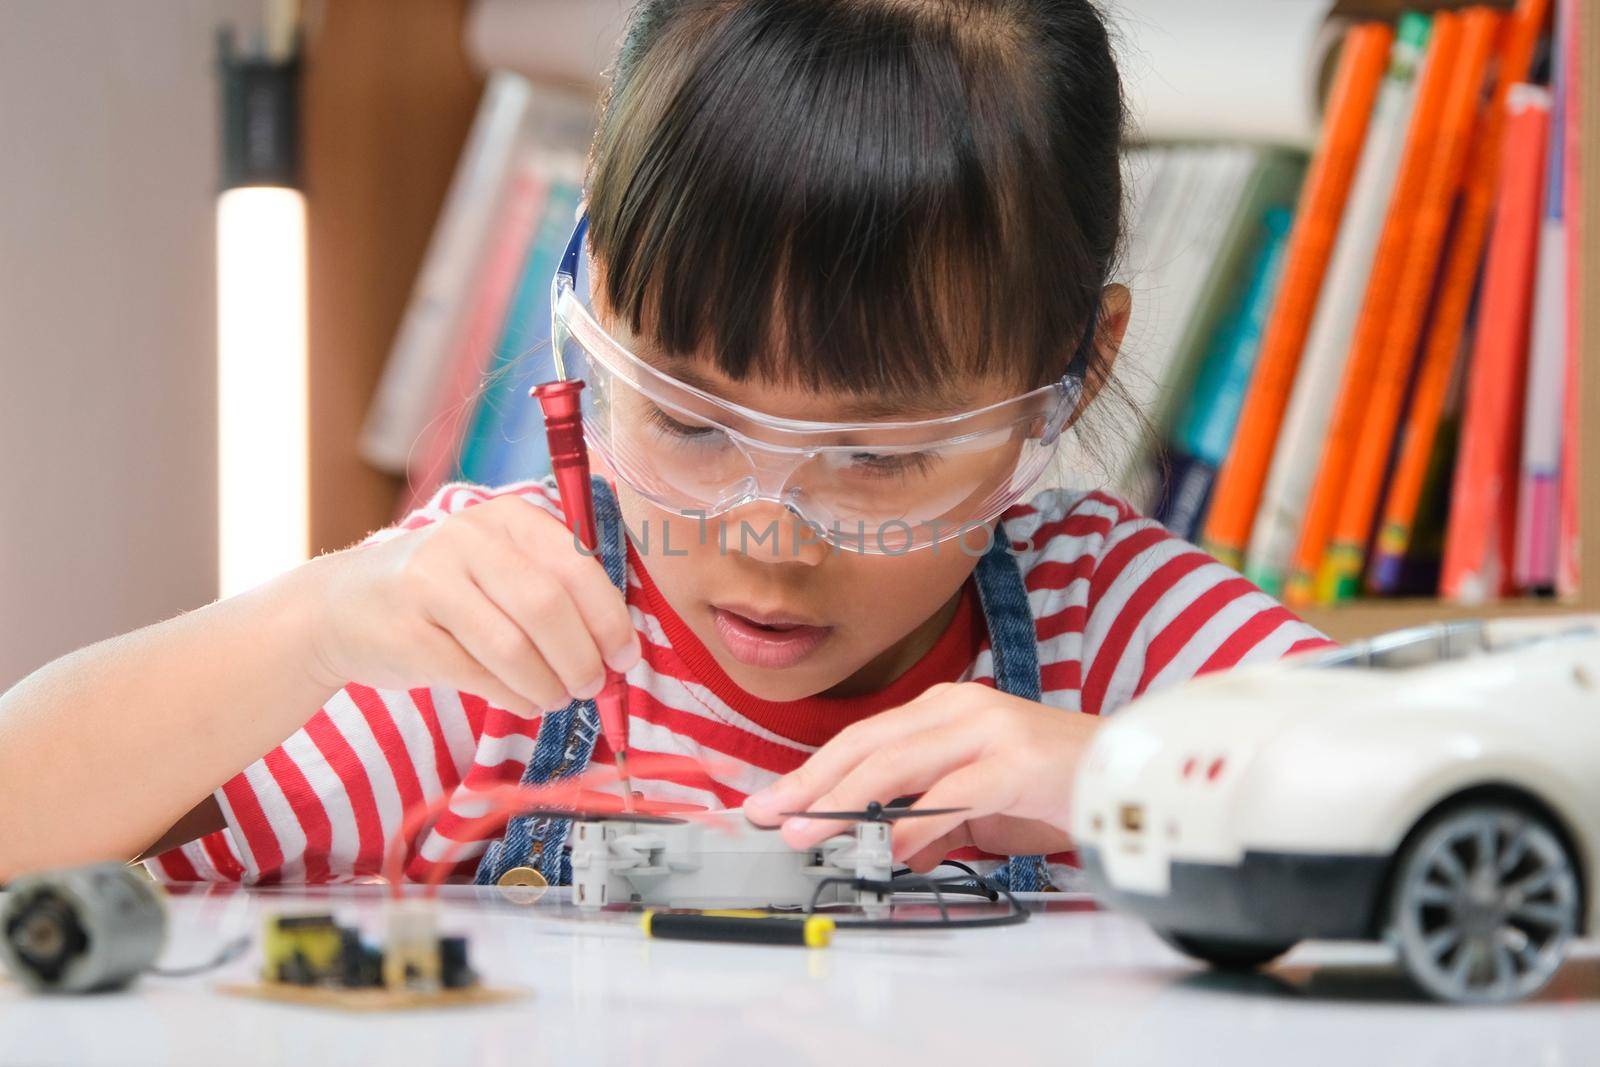 Concentrated little girl repairing her toy car with a tool in hand and carefully assembles toy car with screwdriver. STEM Hobbies for advanced smart kids. by TEERASAK